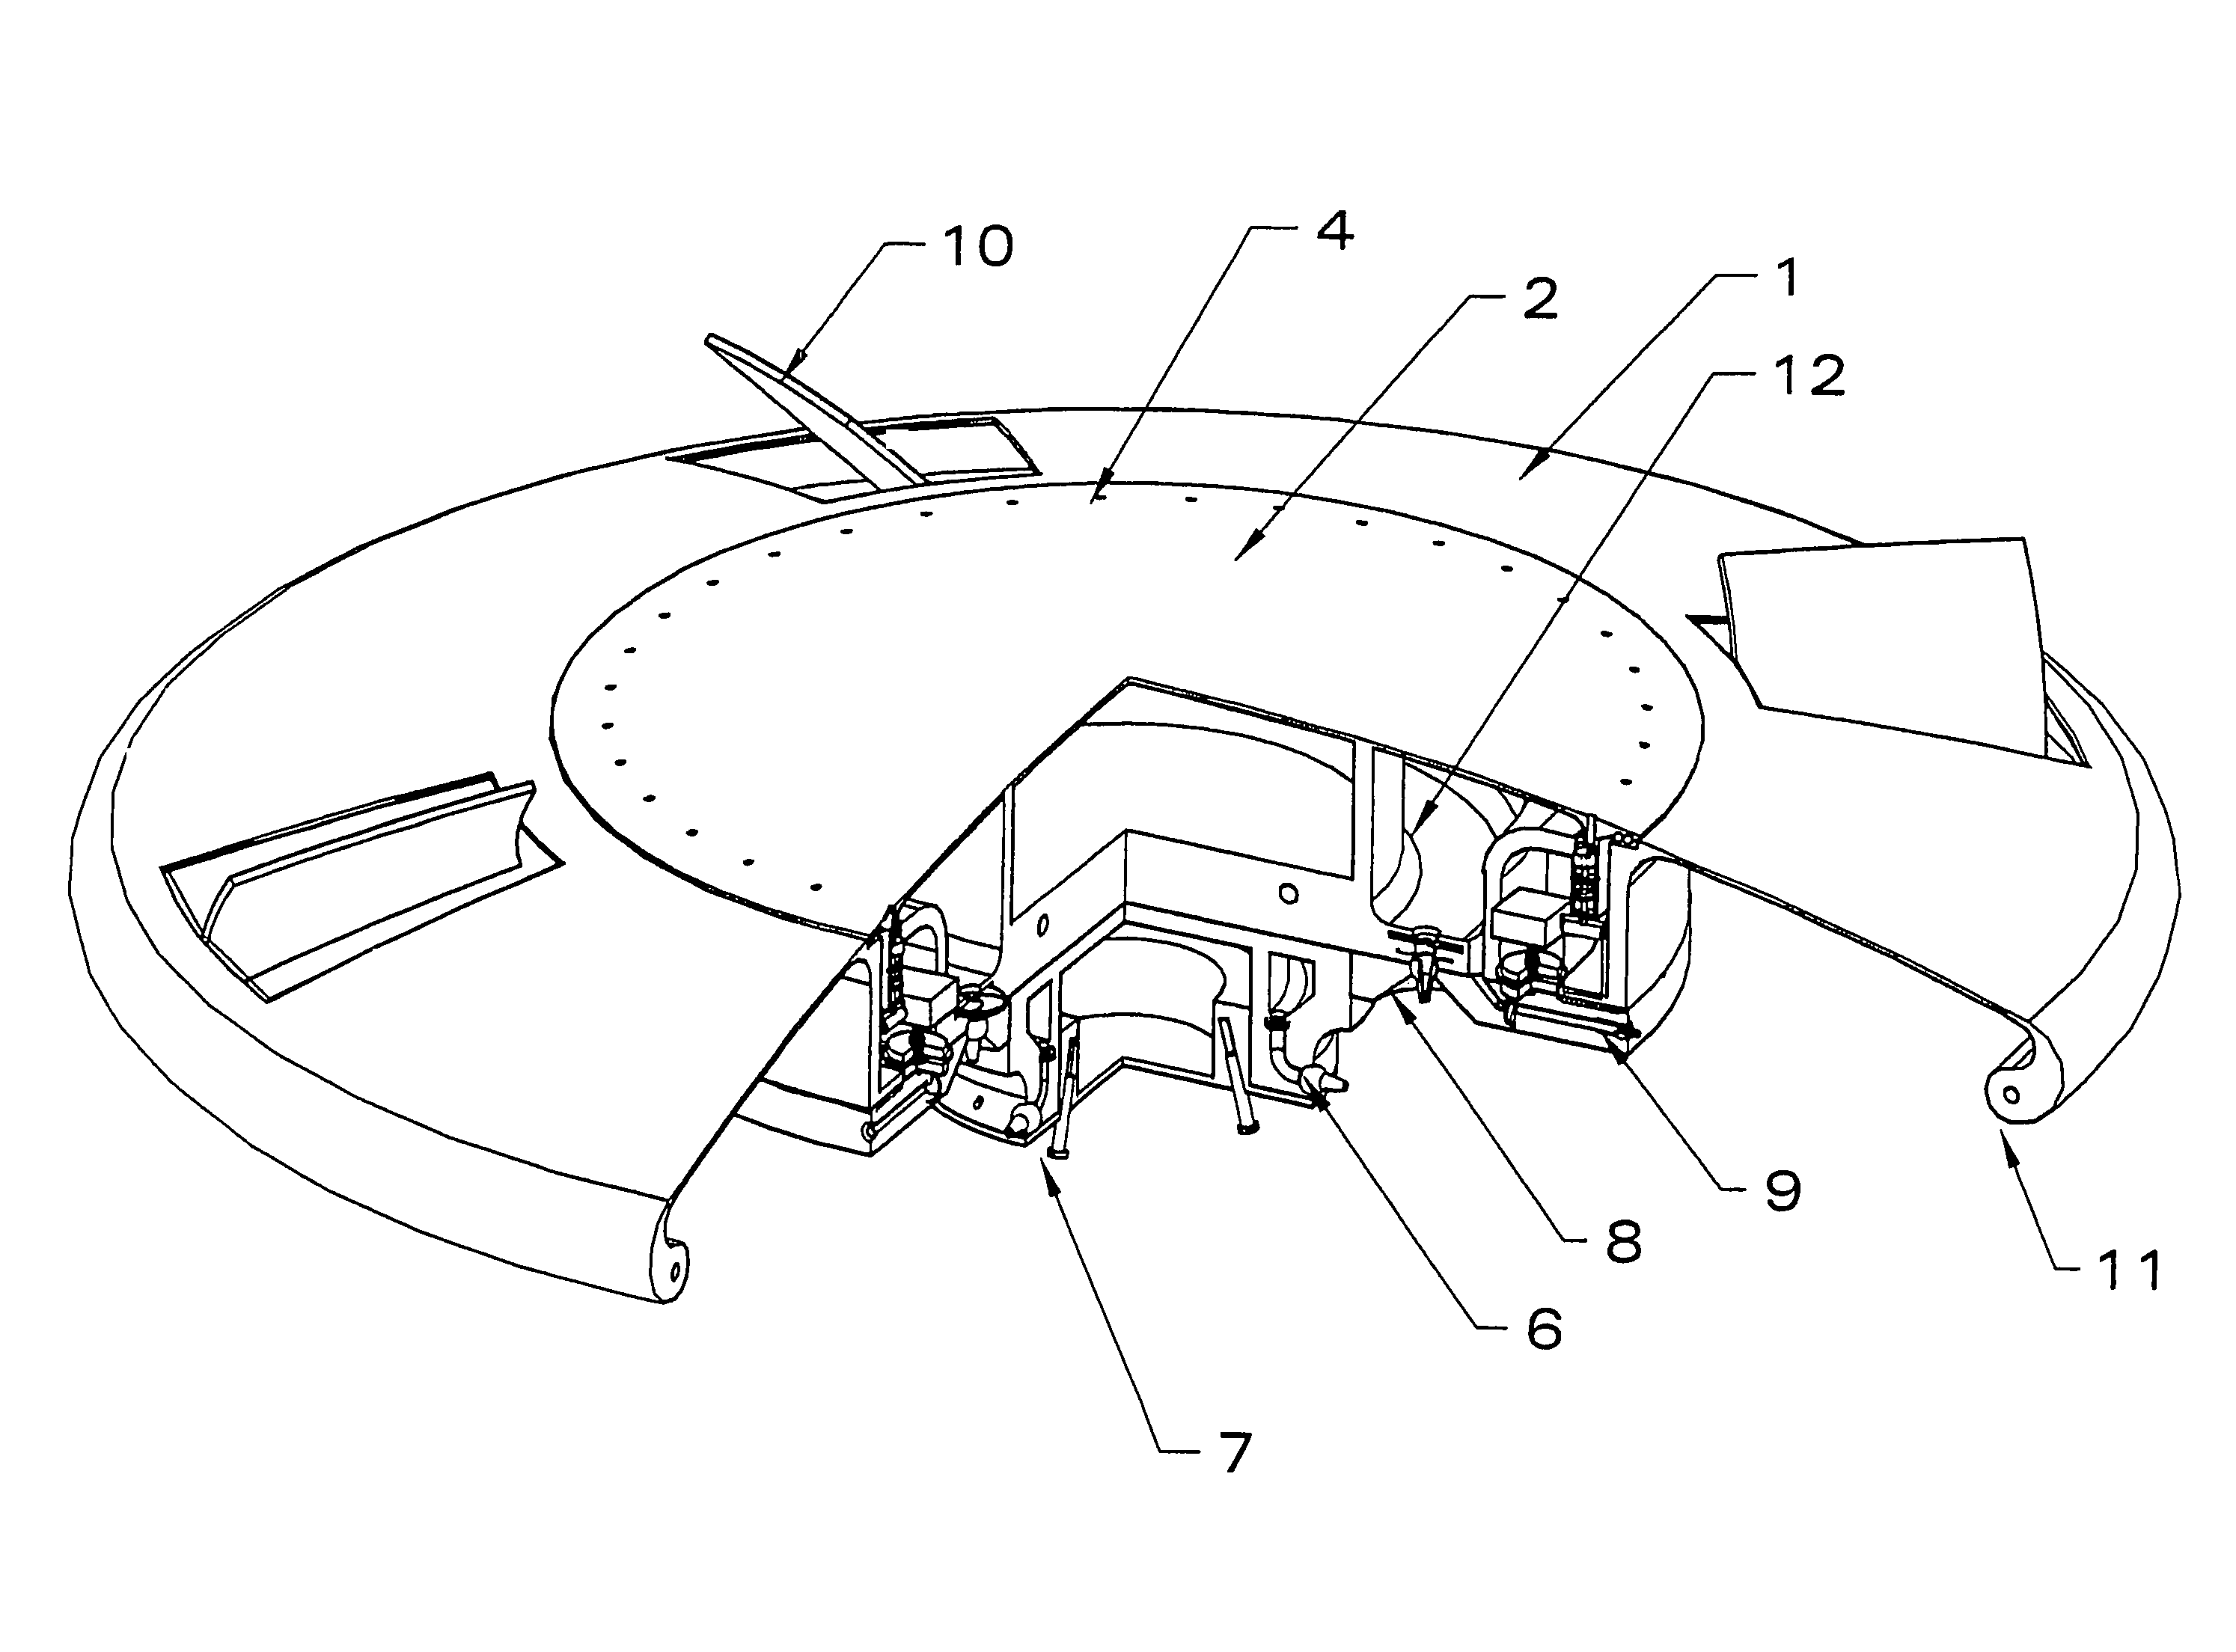 Saucer shaped gyroscopically stabilized vertical take-off and landing aircraft